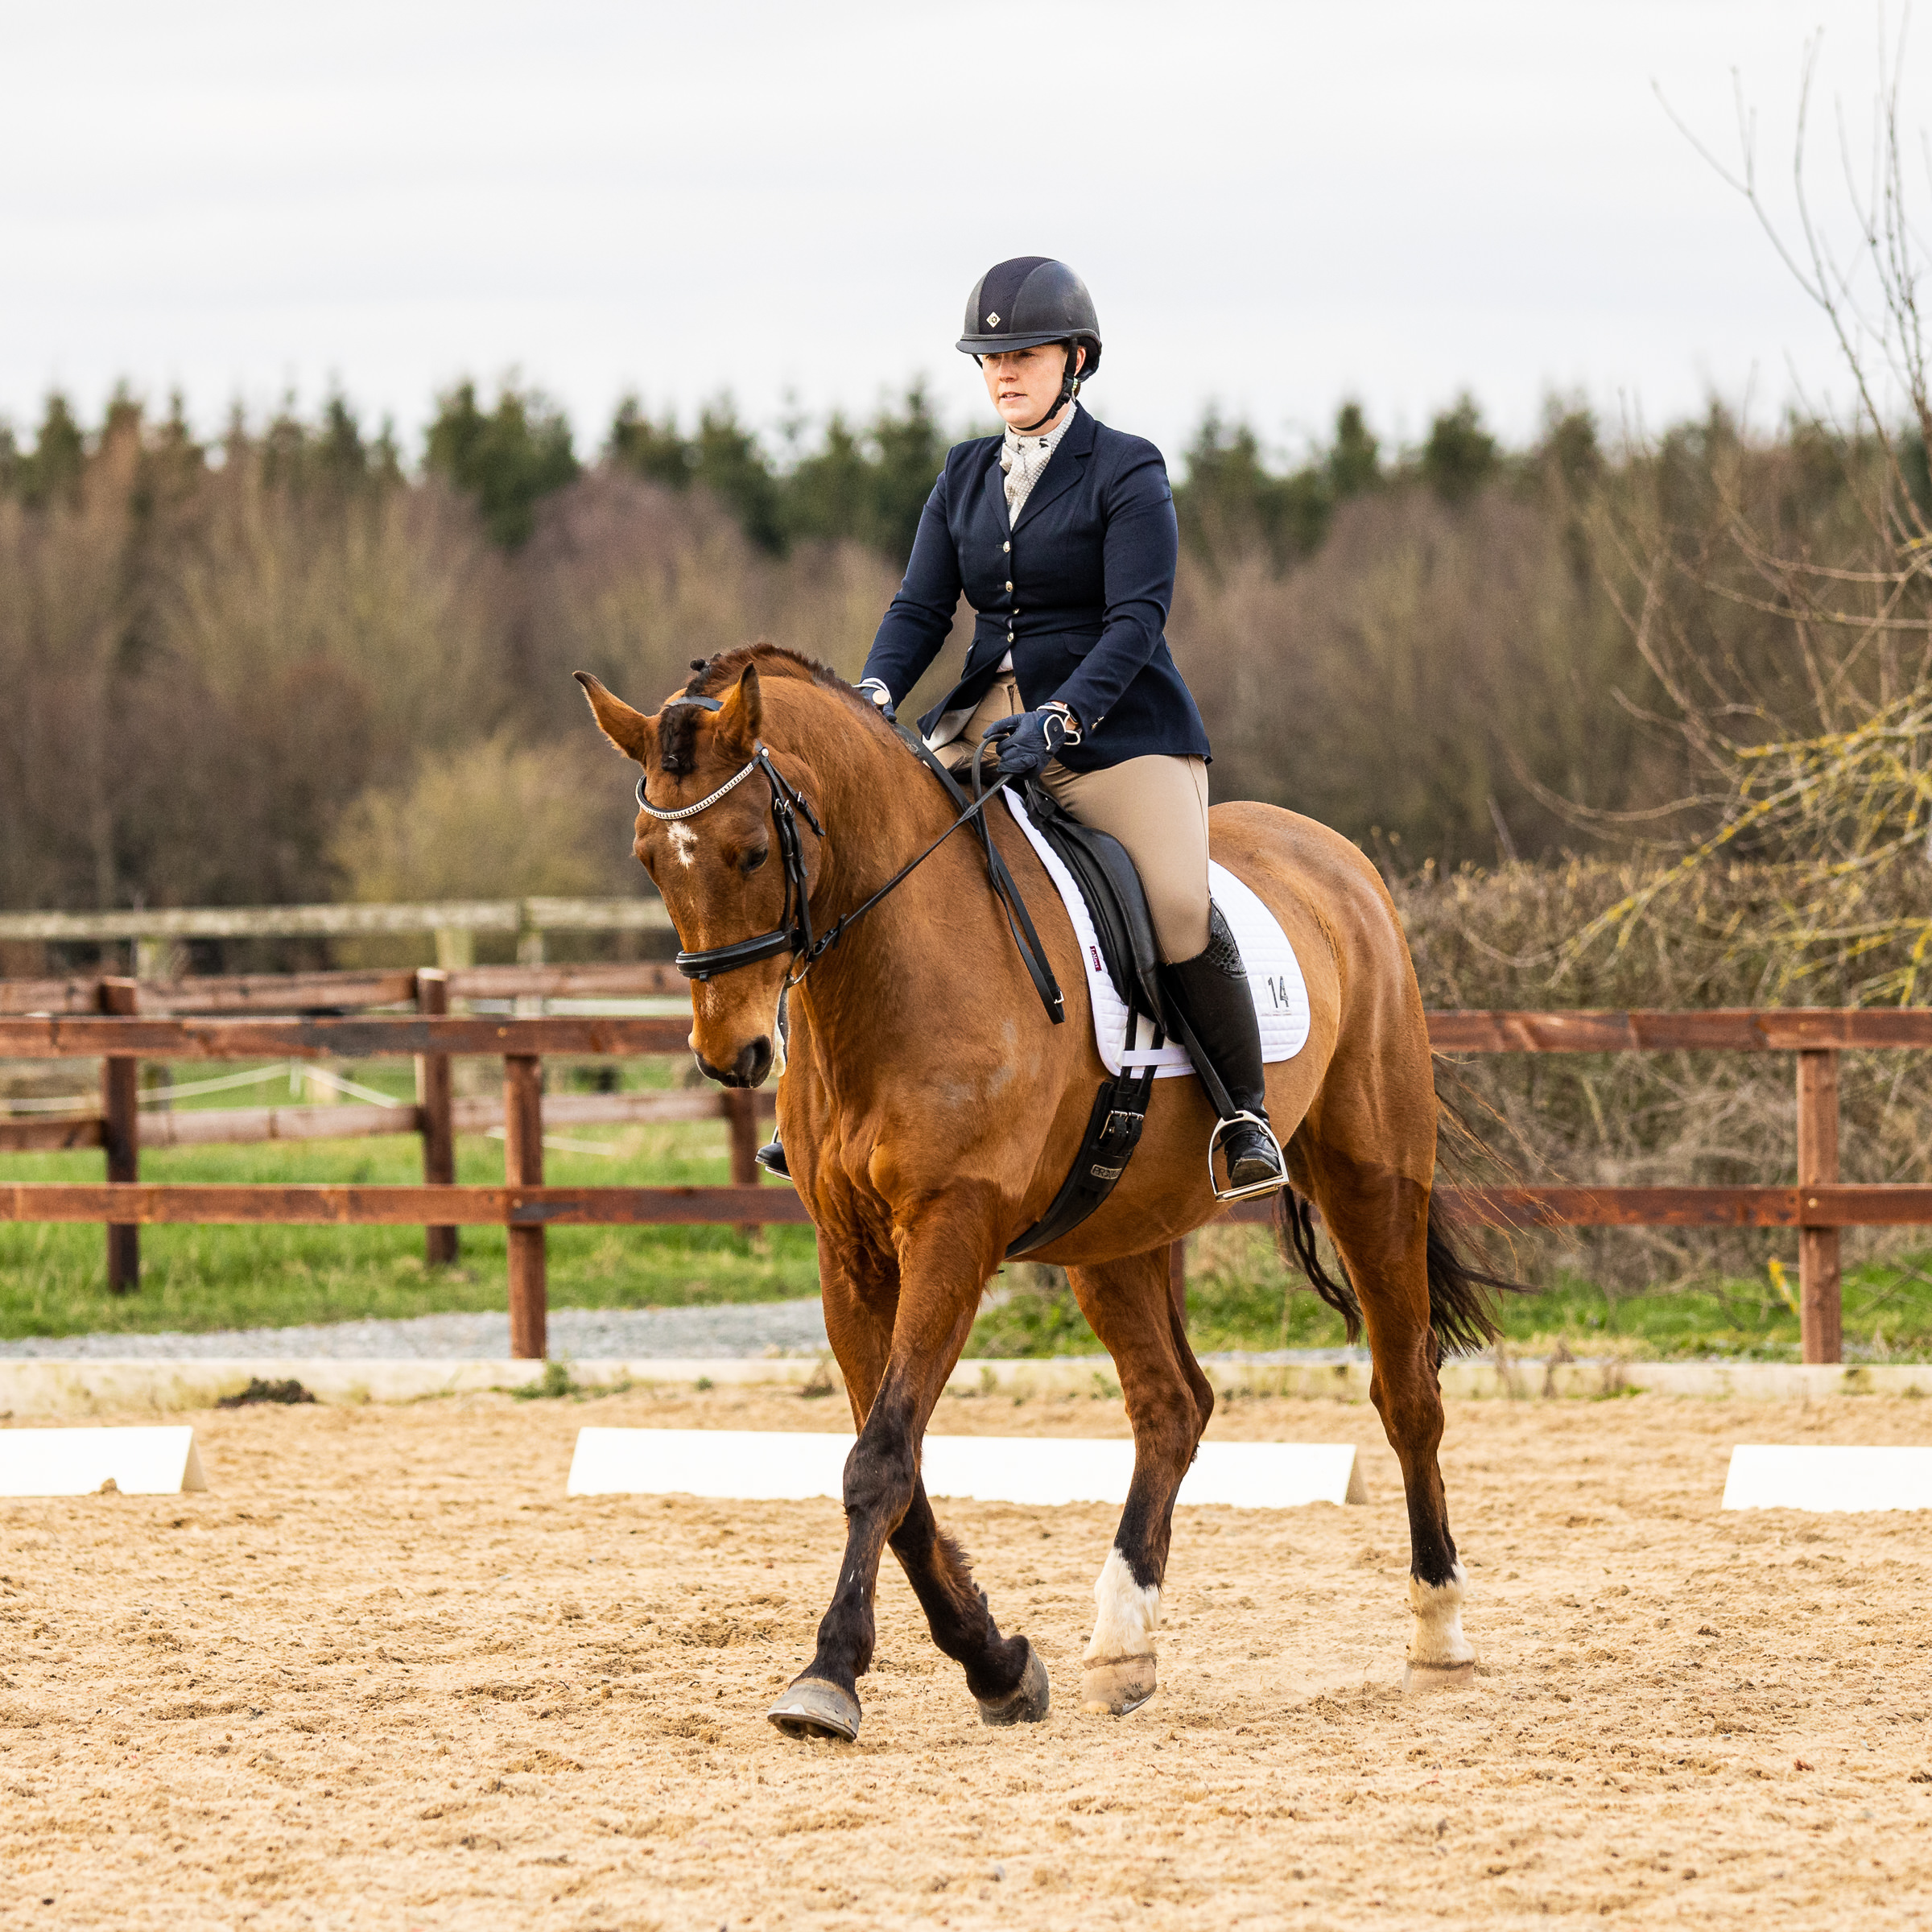 dressage horse and rider in competition